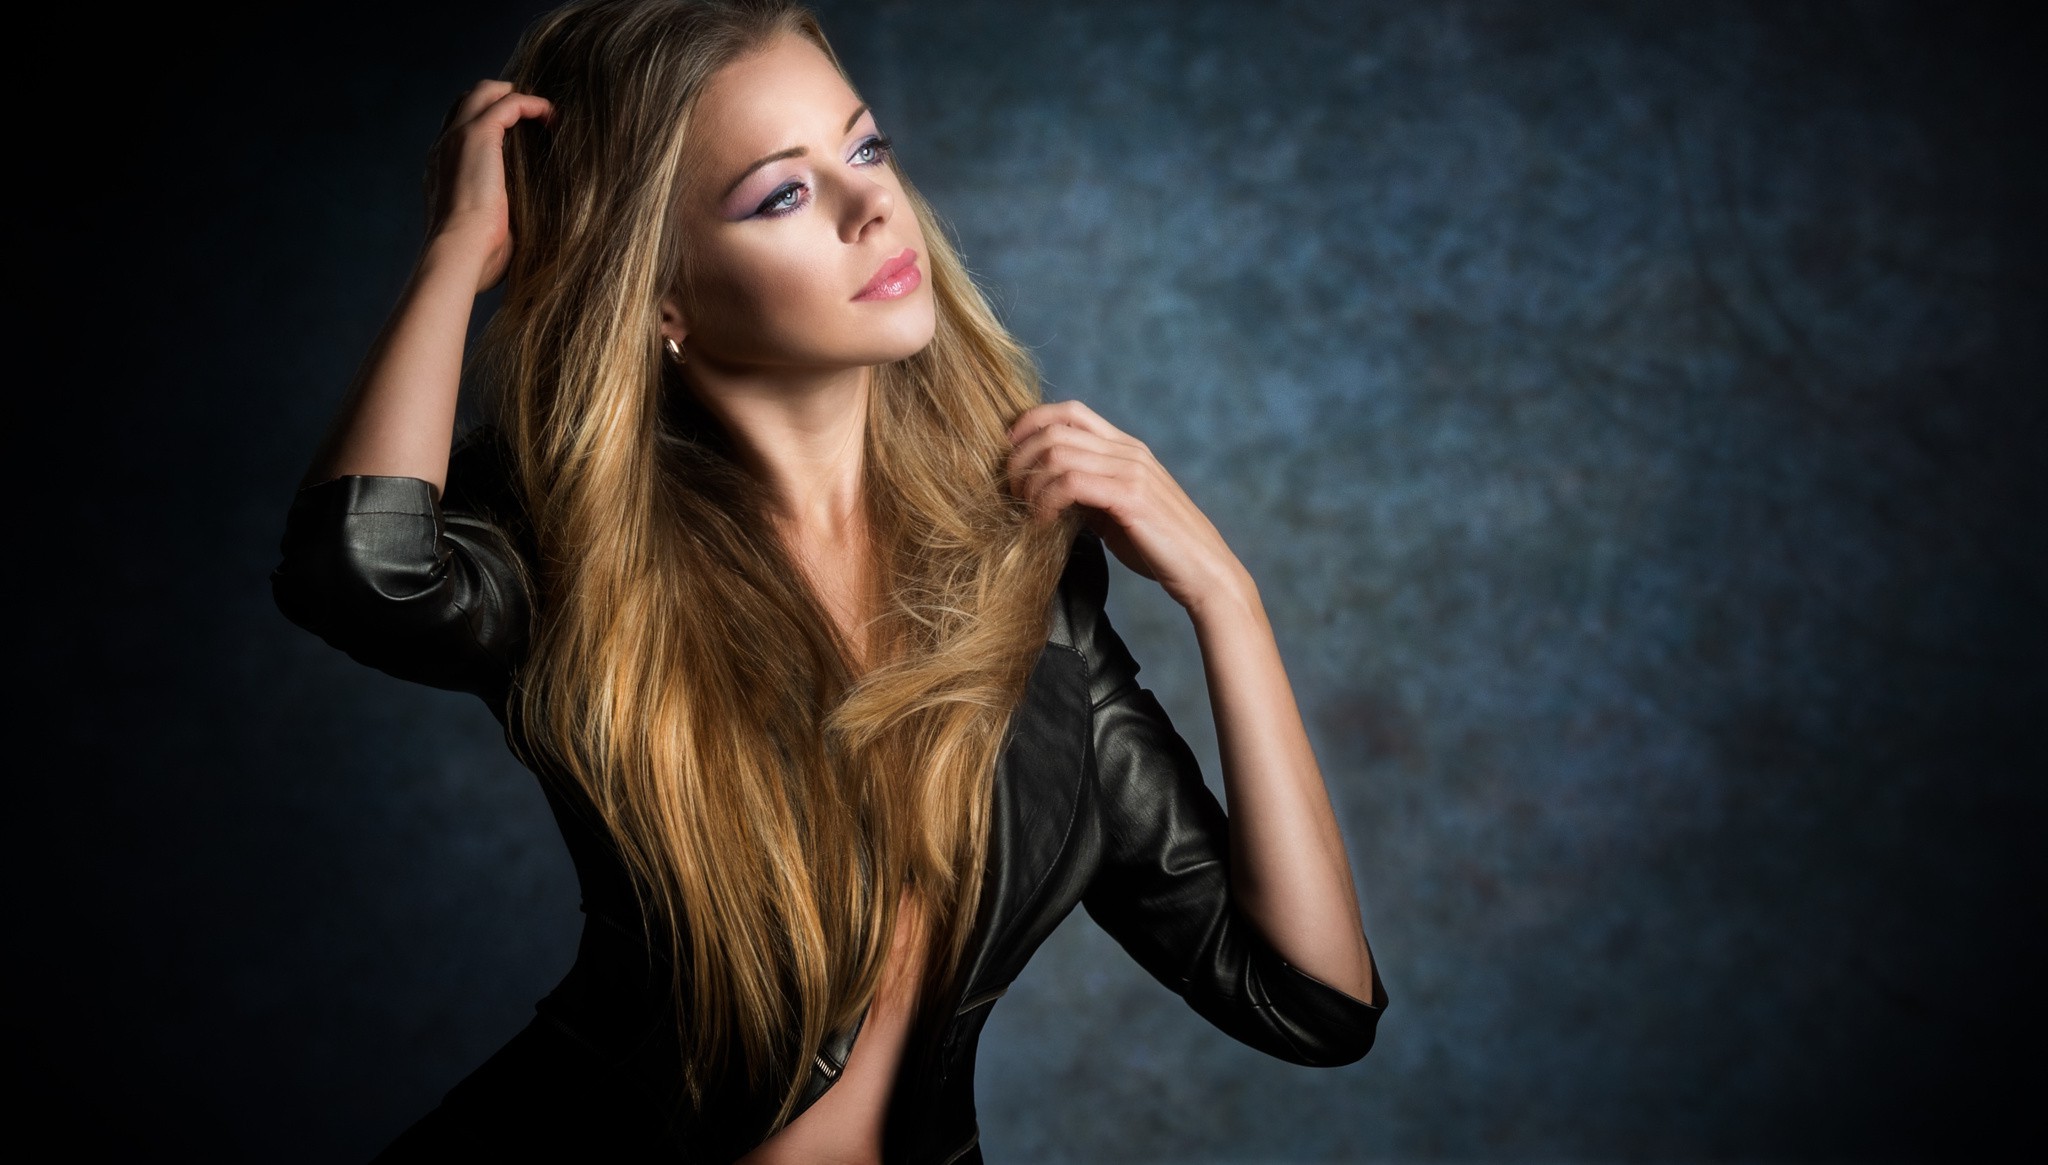 leather jackets wallpapers,hair,face,beauty,long hair,hairstyle